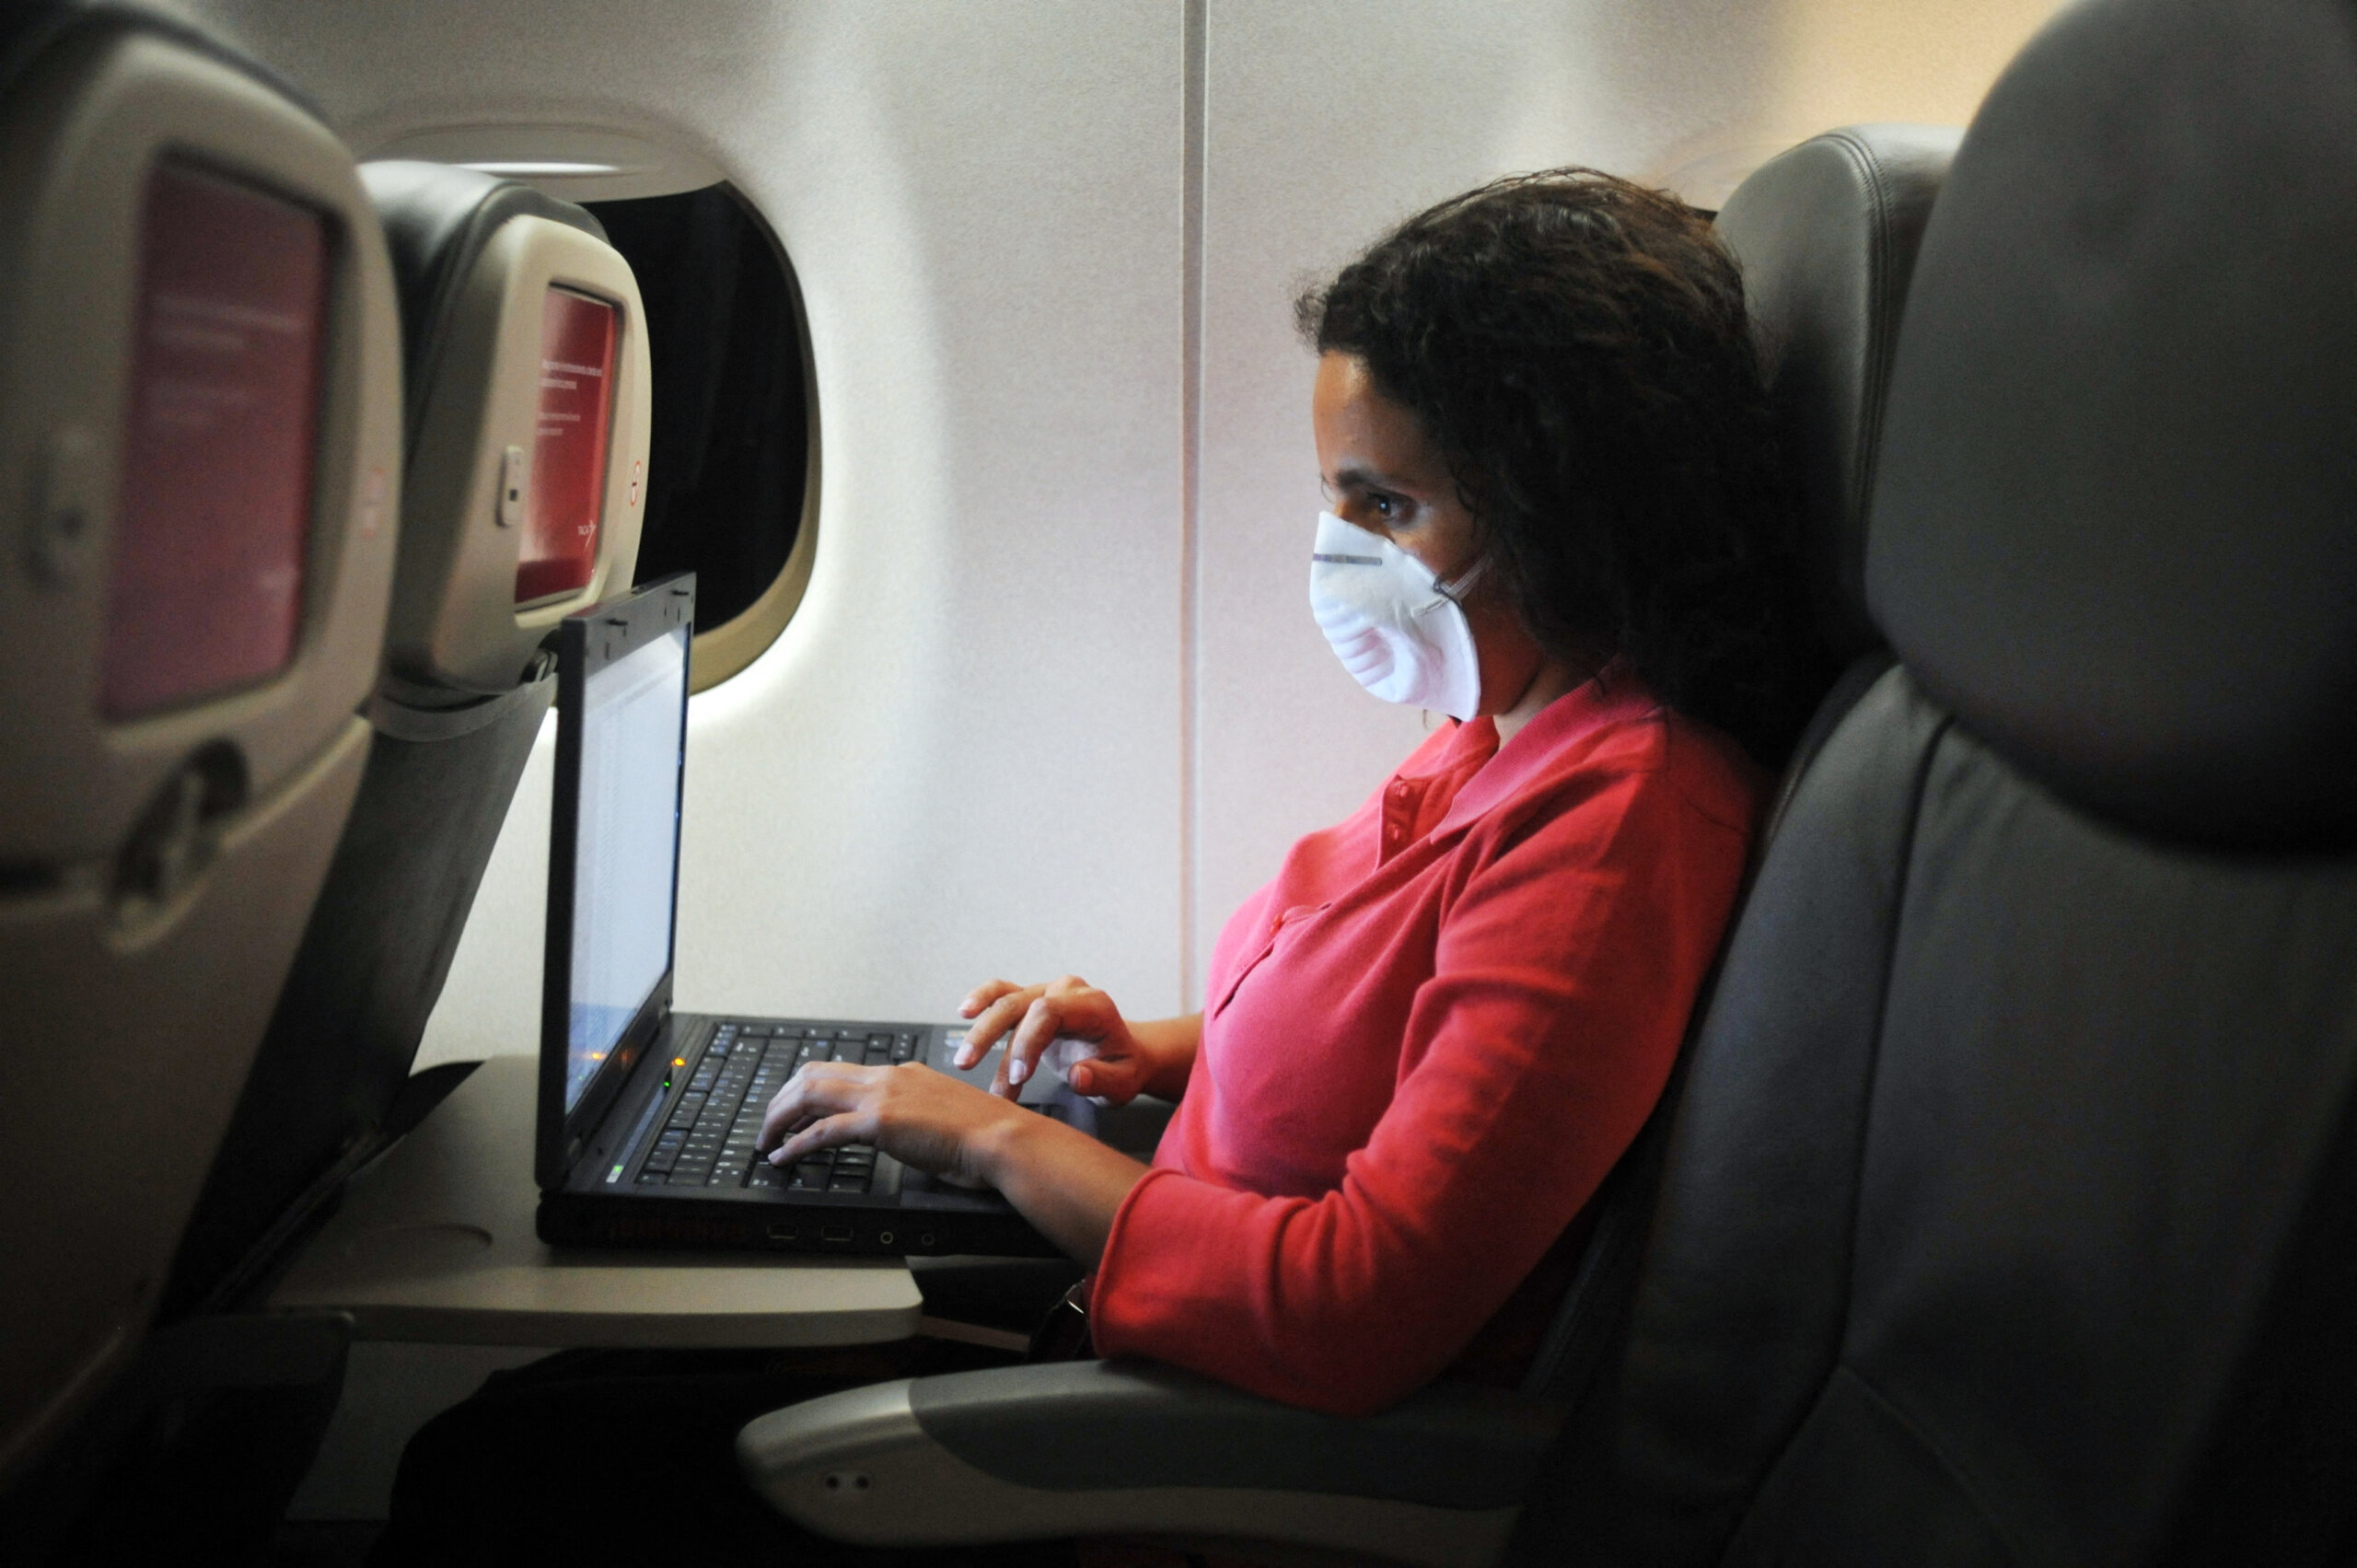 While travellers on longer flights can often buy, register and pay for inflight Wi-Fi passes now, there are a variety of challenges